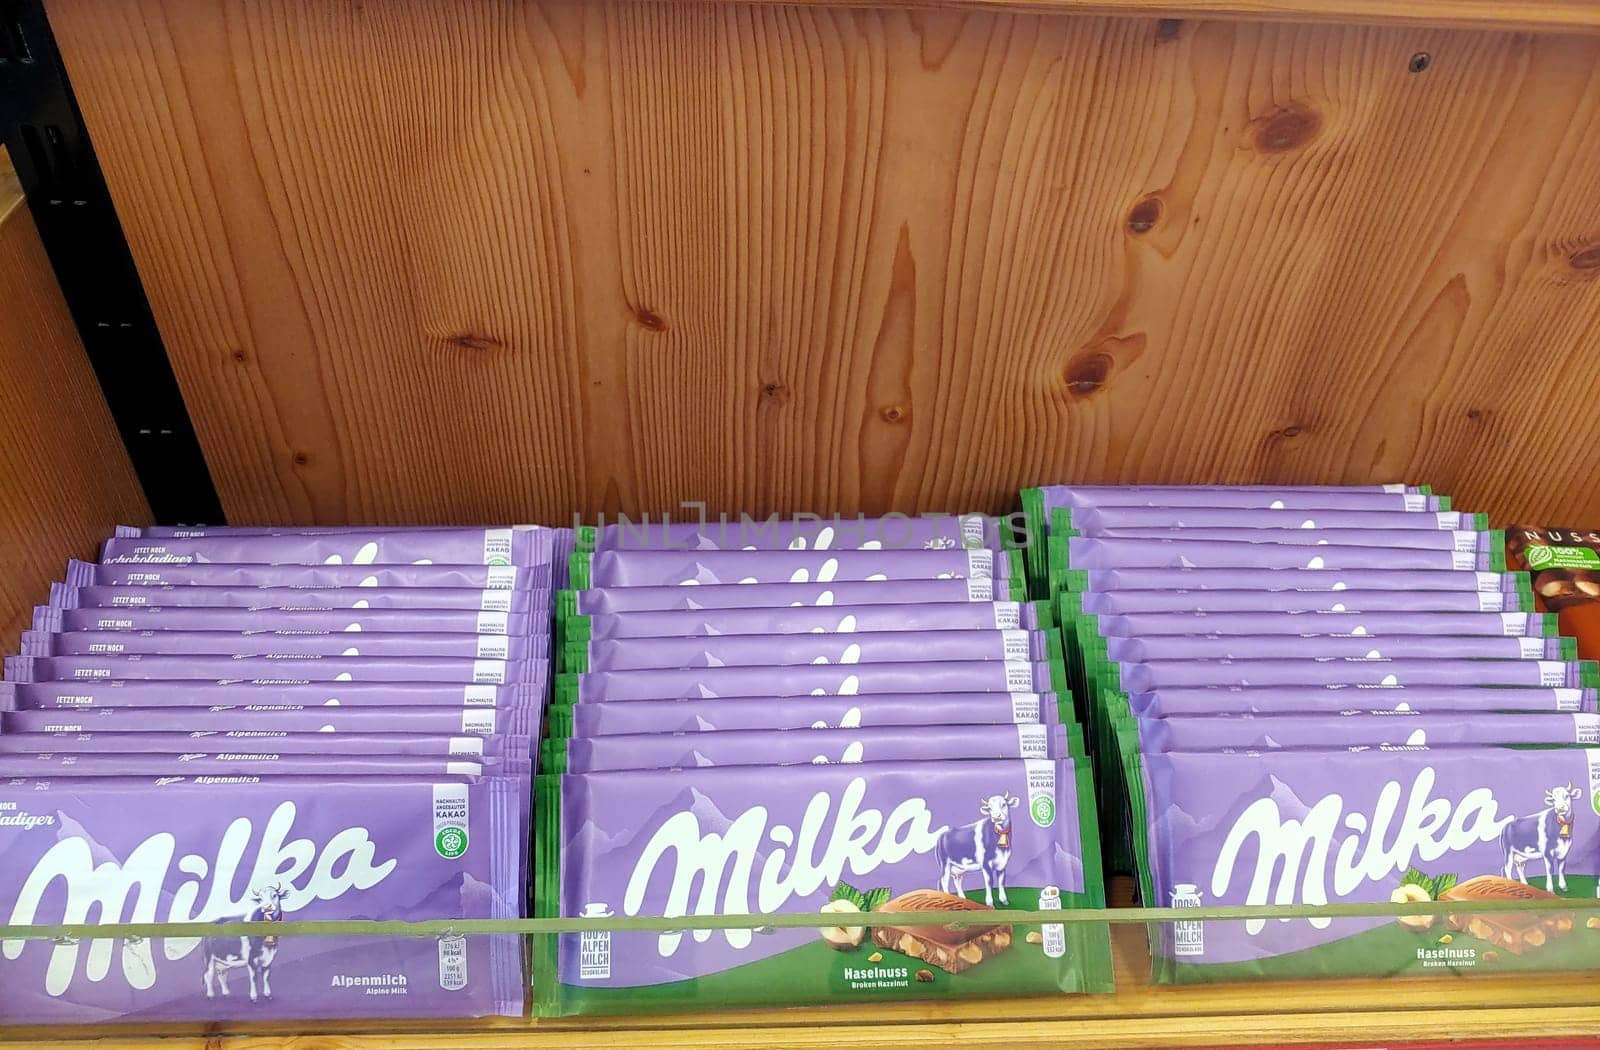 An array of Milka chocolate bars neatly organized on the shelves of a supermarket, showcasing the popular confectionery brand.